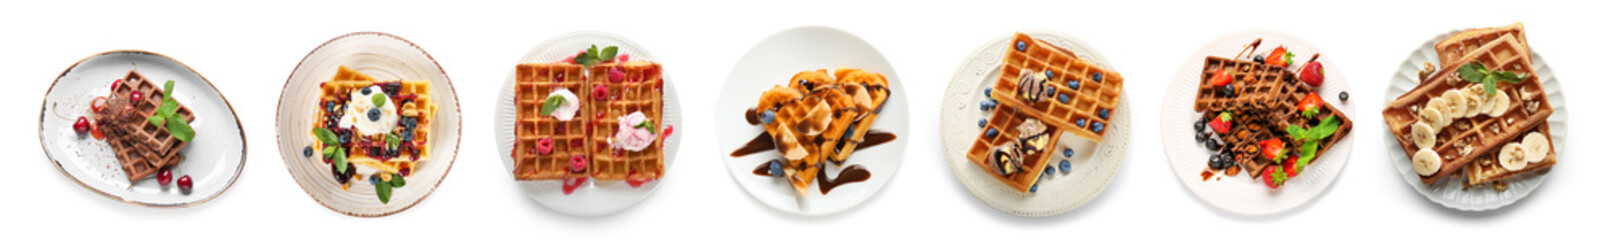 Set of tasty Belgian waffles on white background, top view